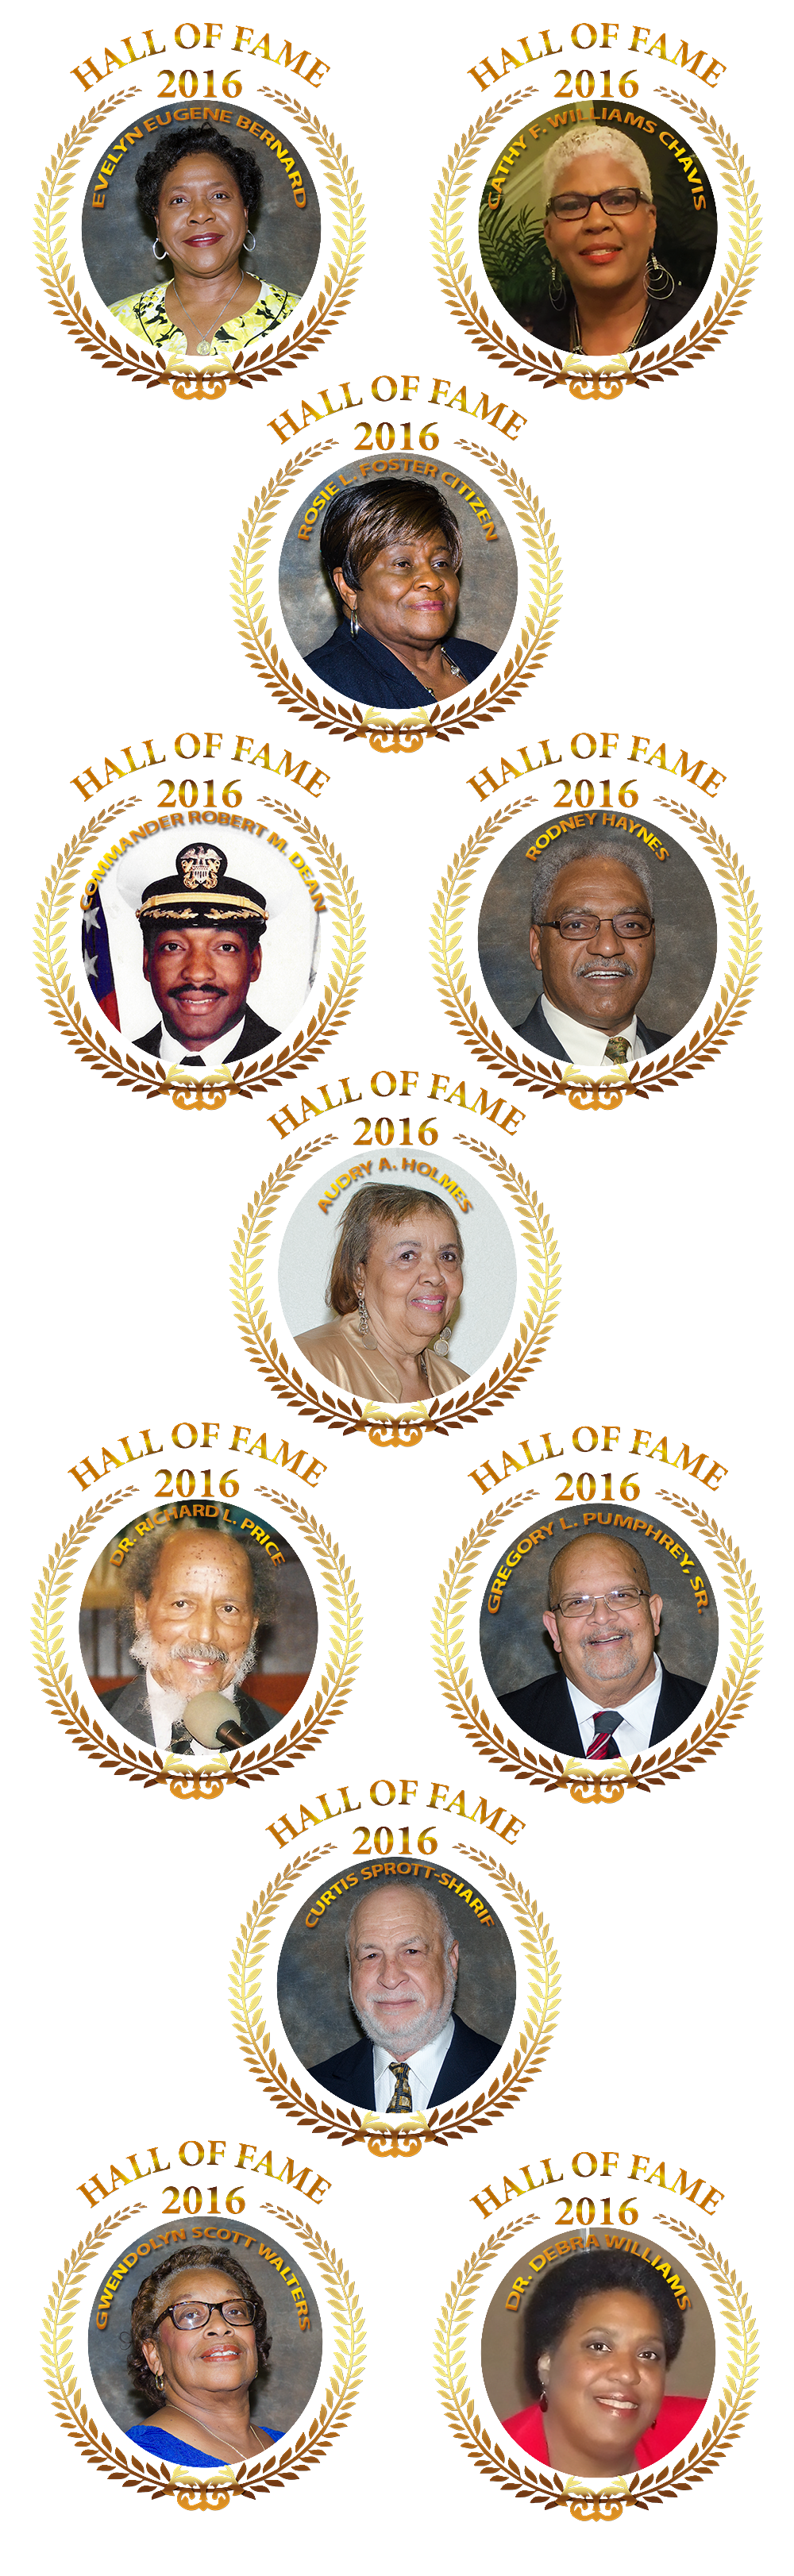 Hall of Fame Nominees